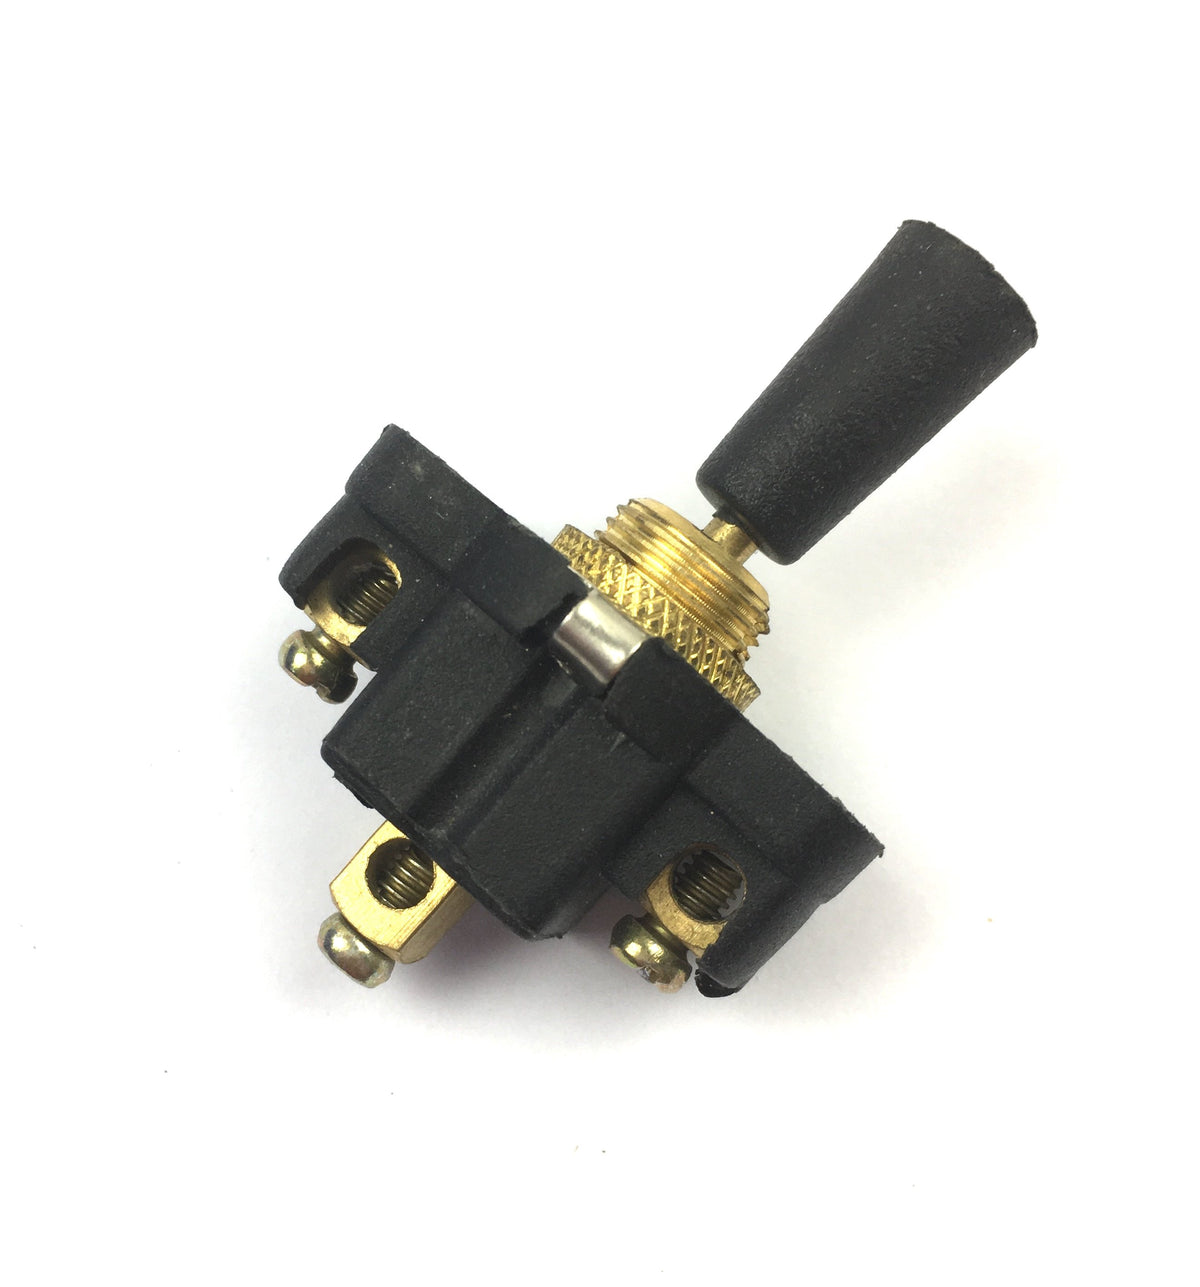 Universal On/Off or Indicator Toggle Switch - 3 way